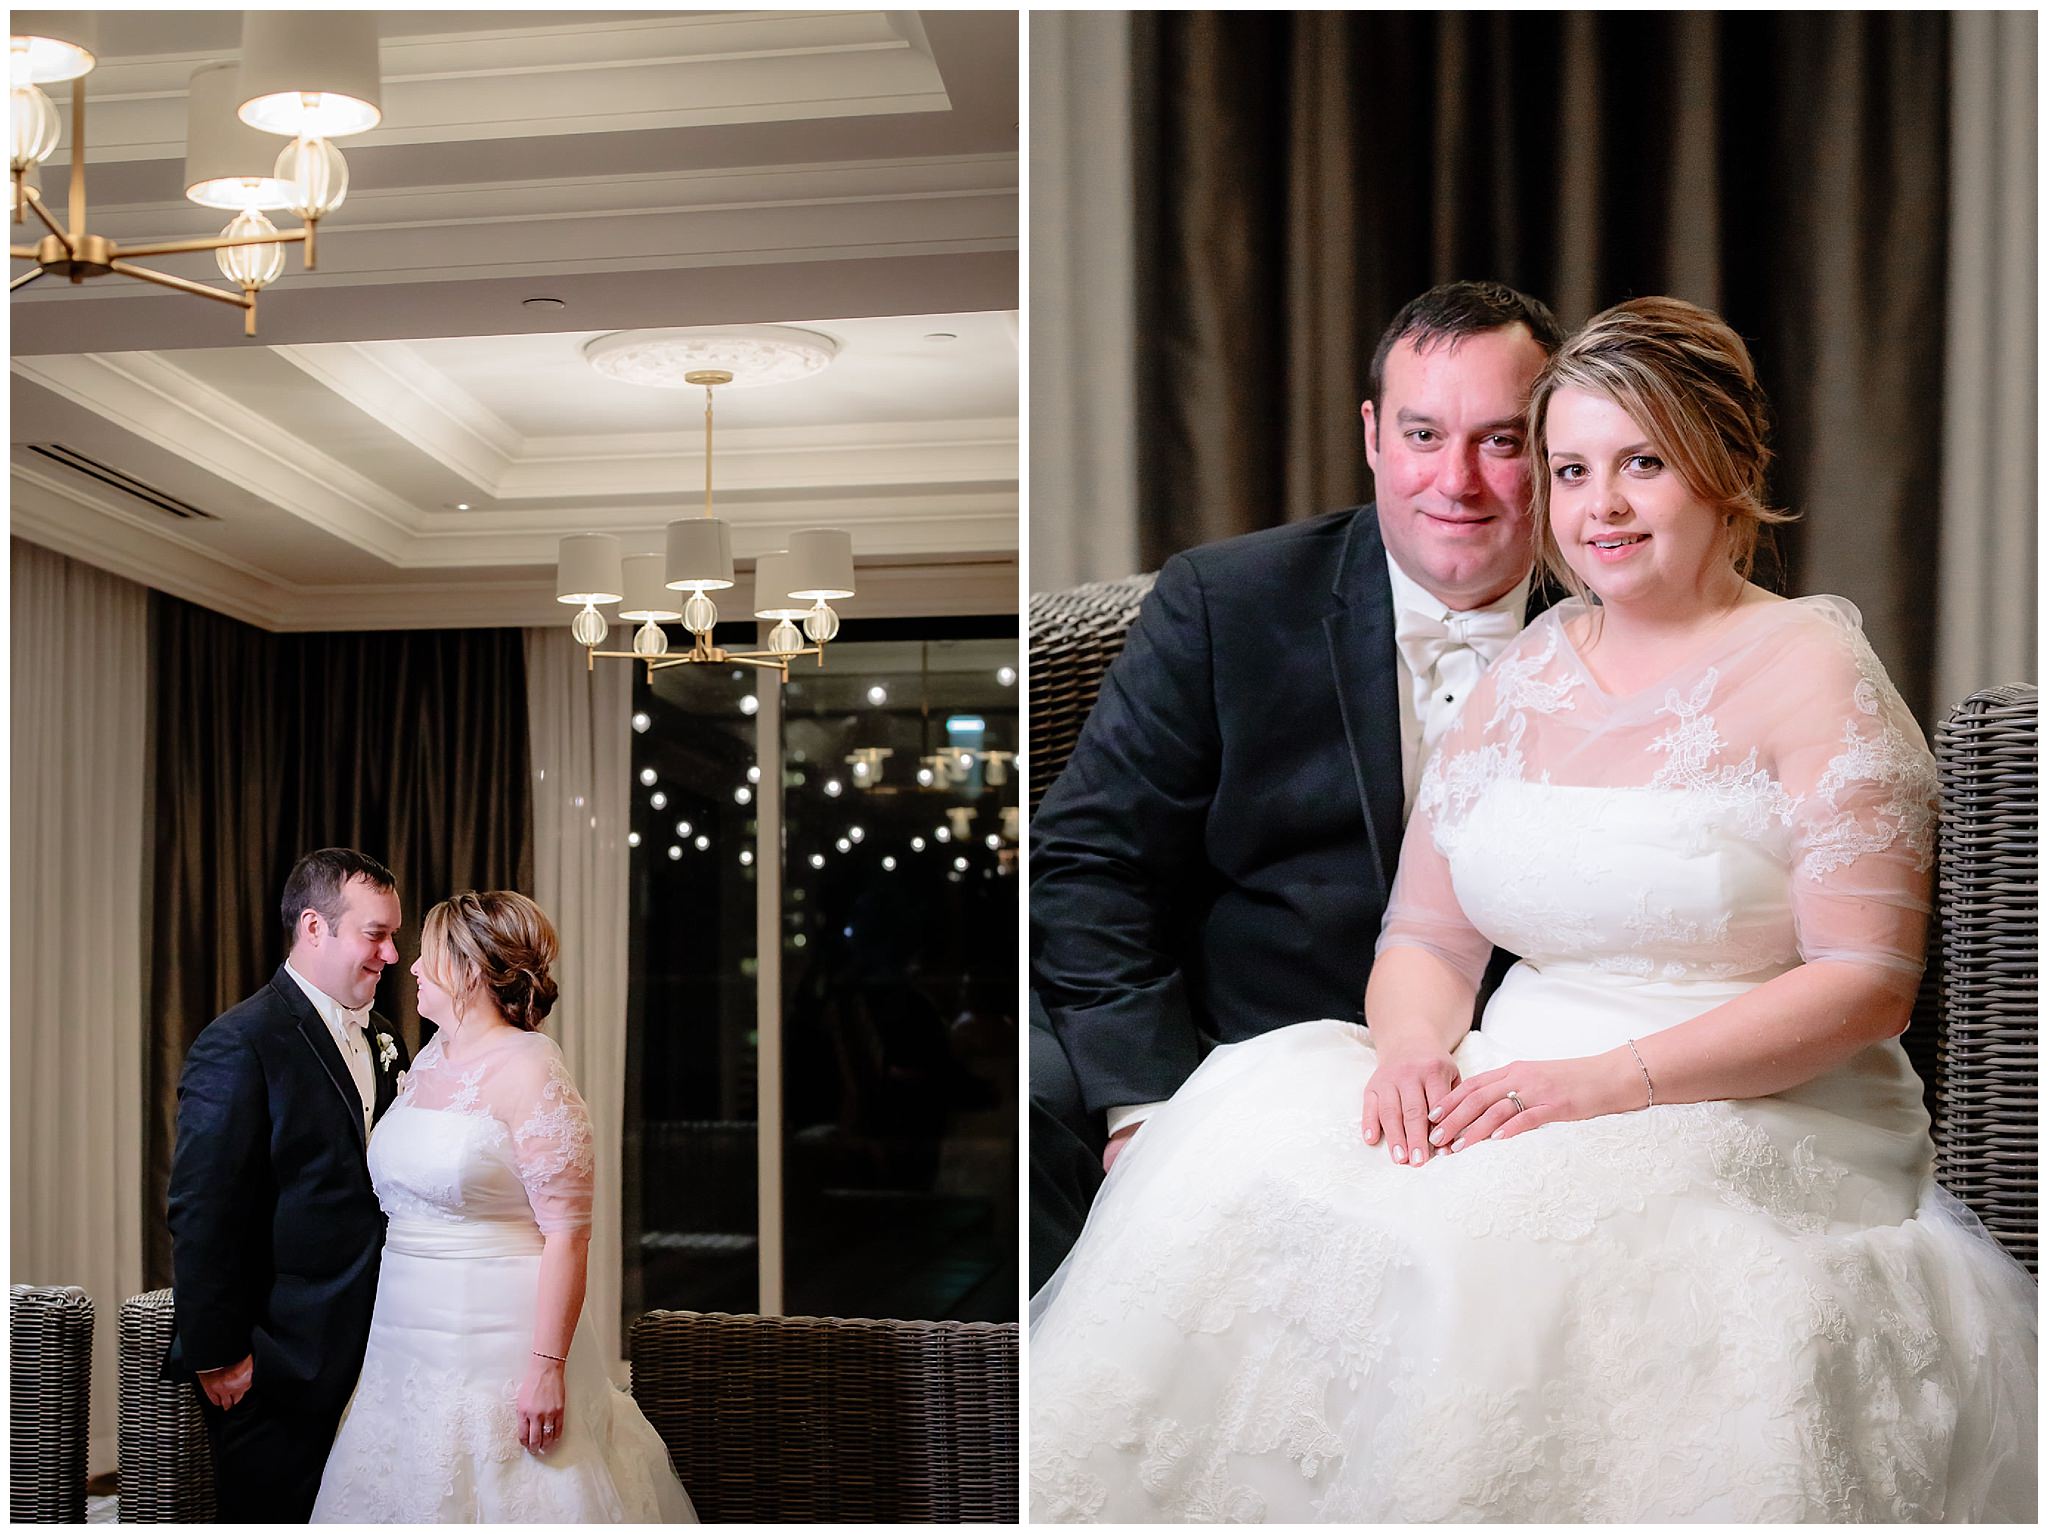 Newlywed's portraits in the Rialto Room of Pittsburgh's Hotel Monaco